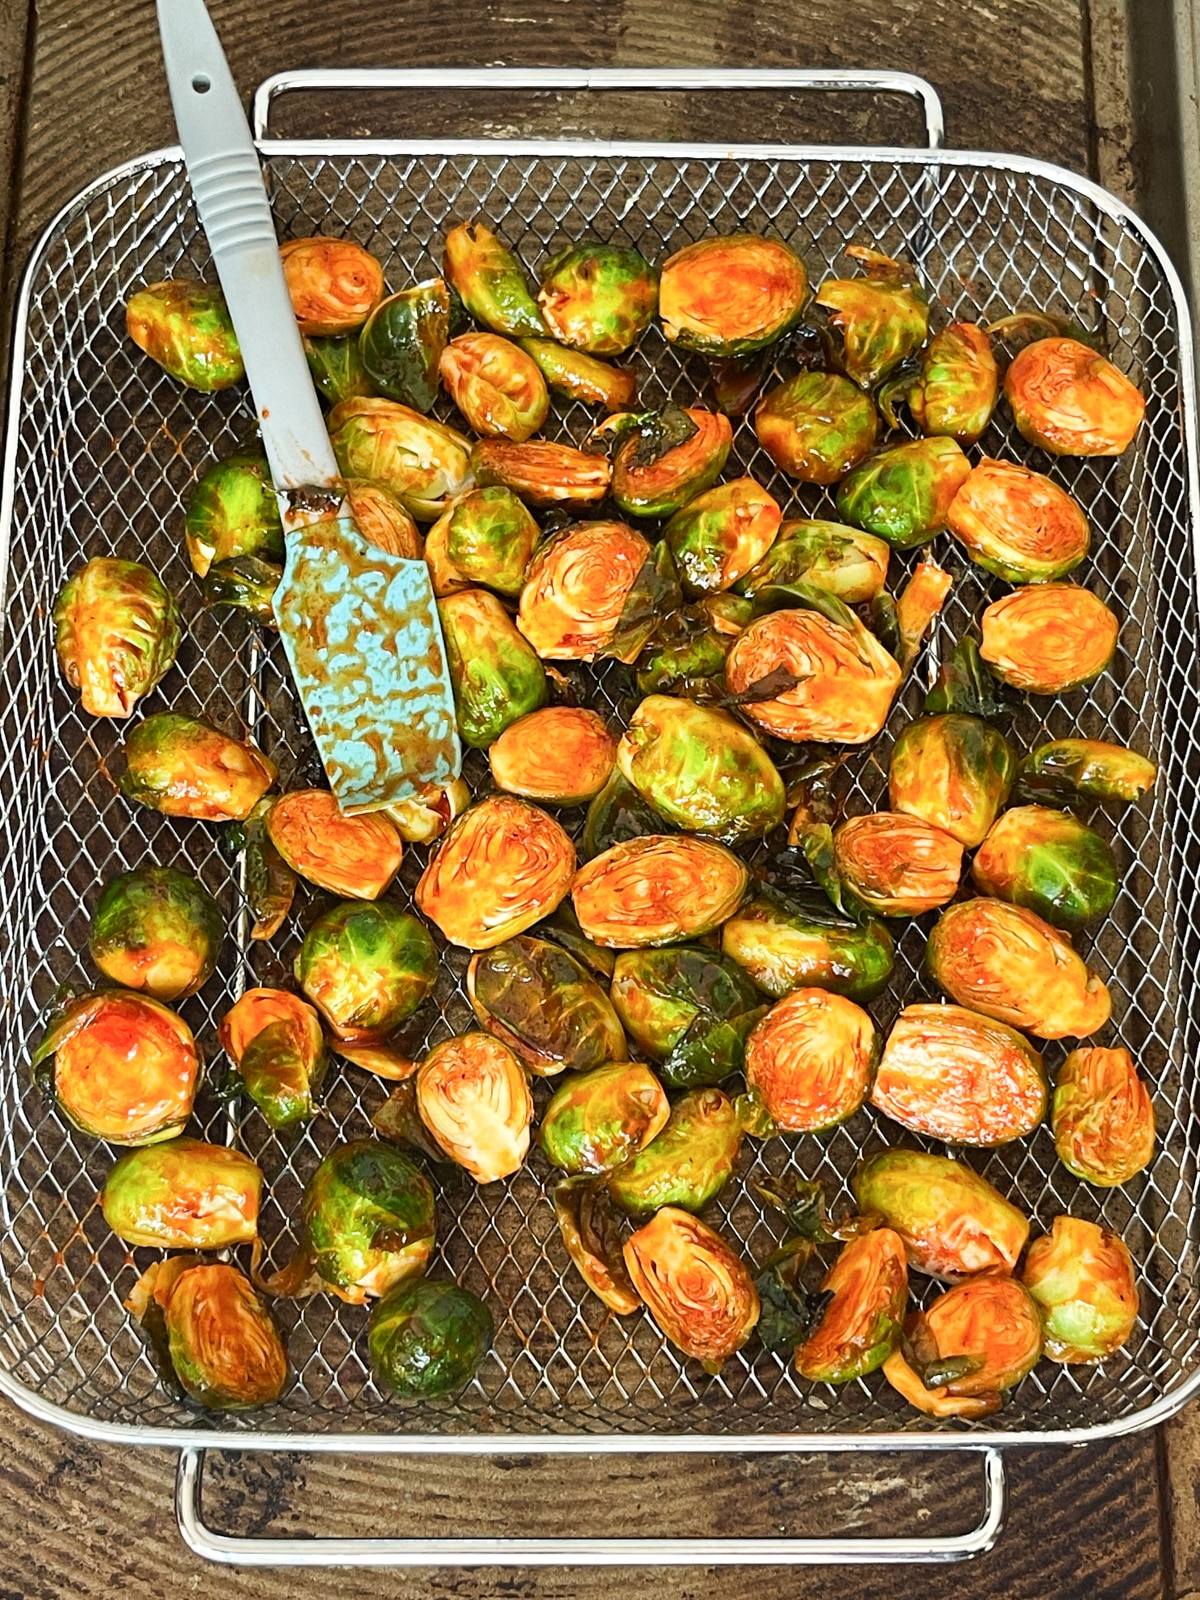 Brussels sprouts coated with a gochujang sauce sitting in an air fryer basket with a rubber spatula on top.